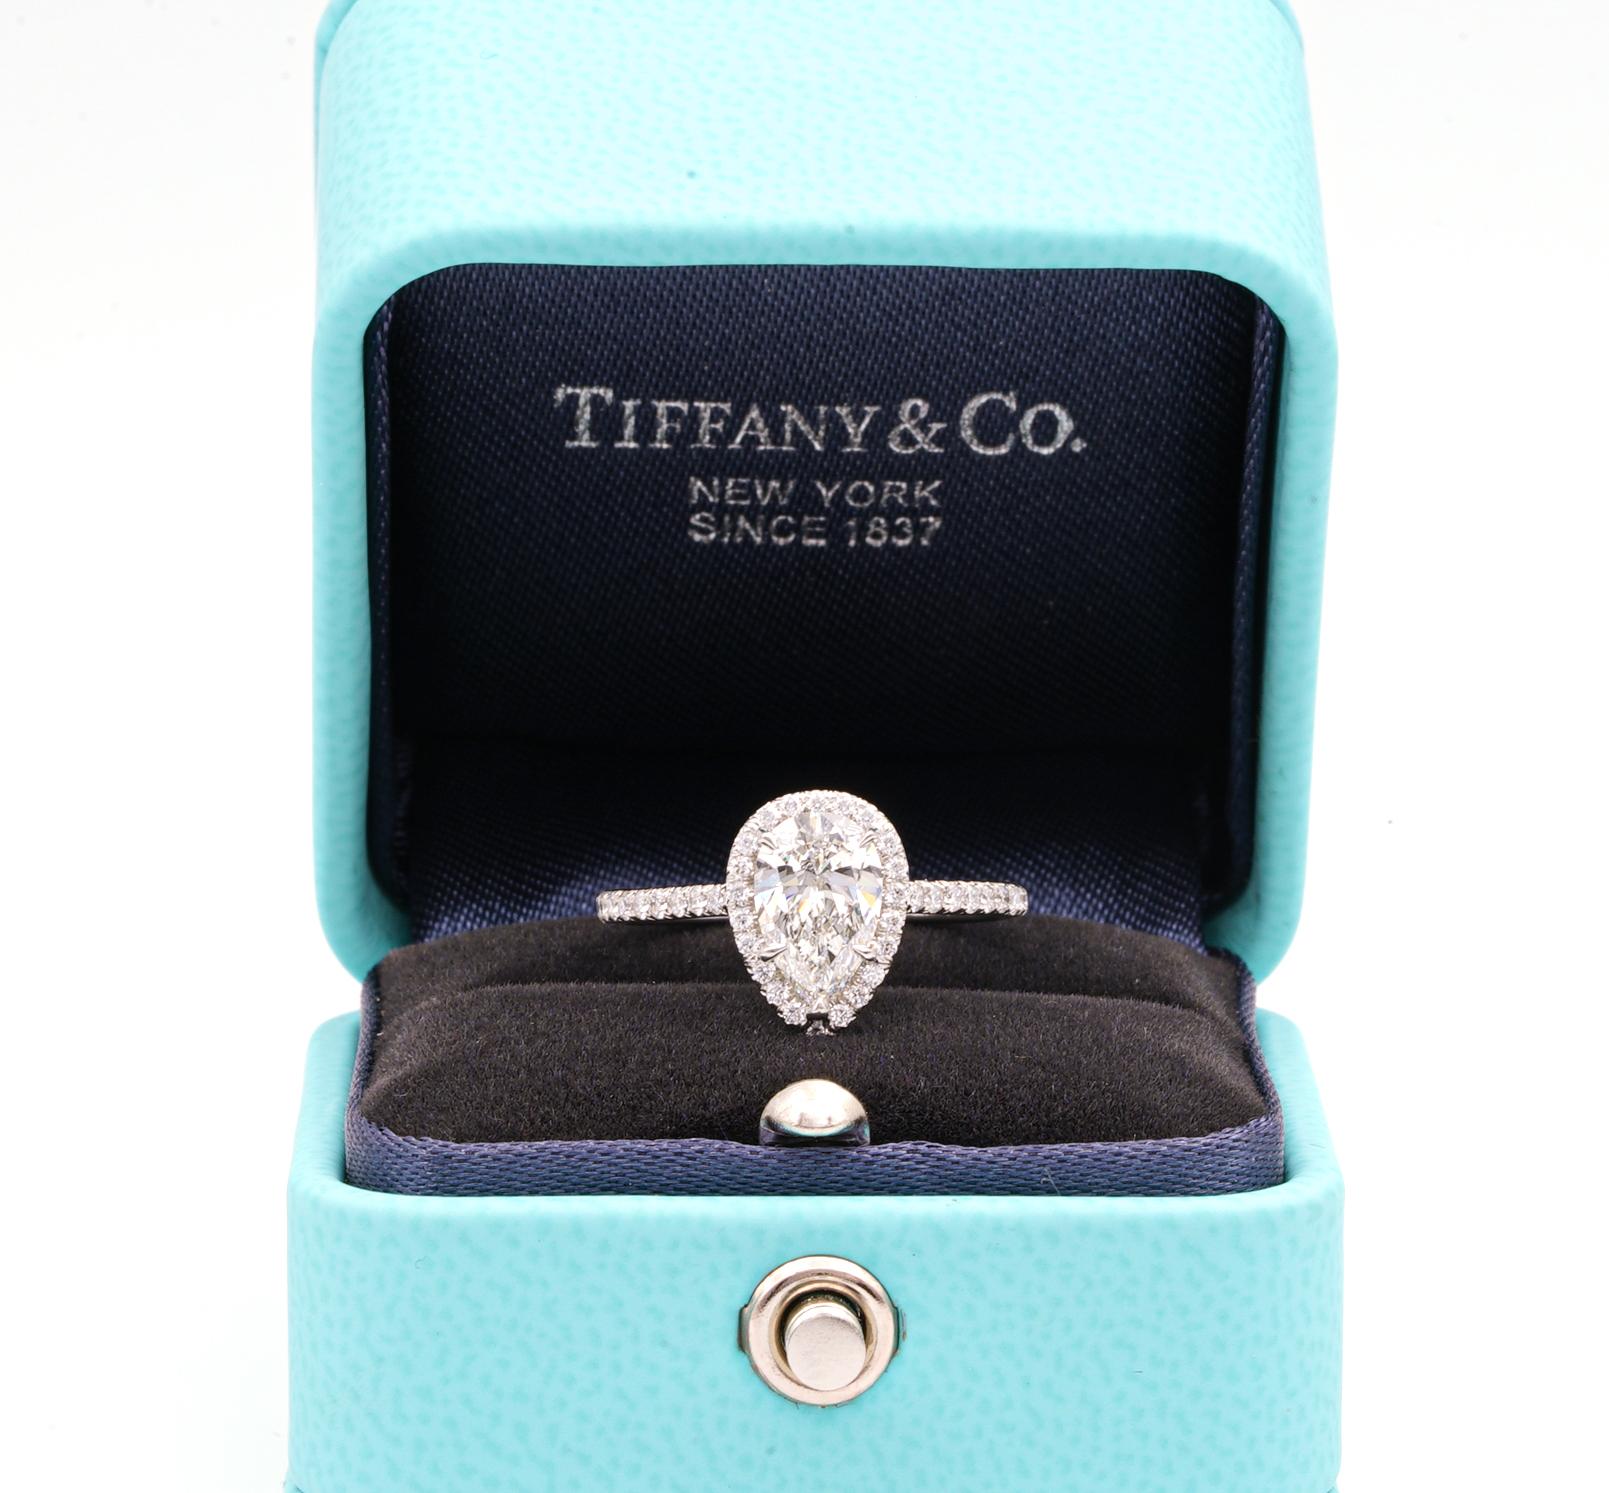 Tiffany & Co. Soleste Diamond Engagement ring featuring a 1.10 ct Pear Shape Center diamond finely crafted in Platinum, accented by a bead set diamond halo and shank with 42 round brilliant cut diamonds weighing 0.40 cts. total weight